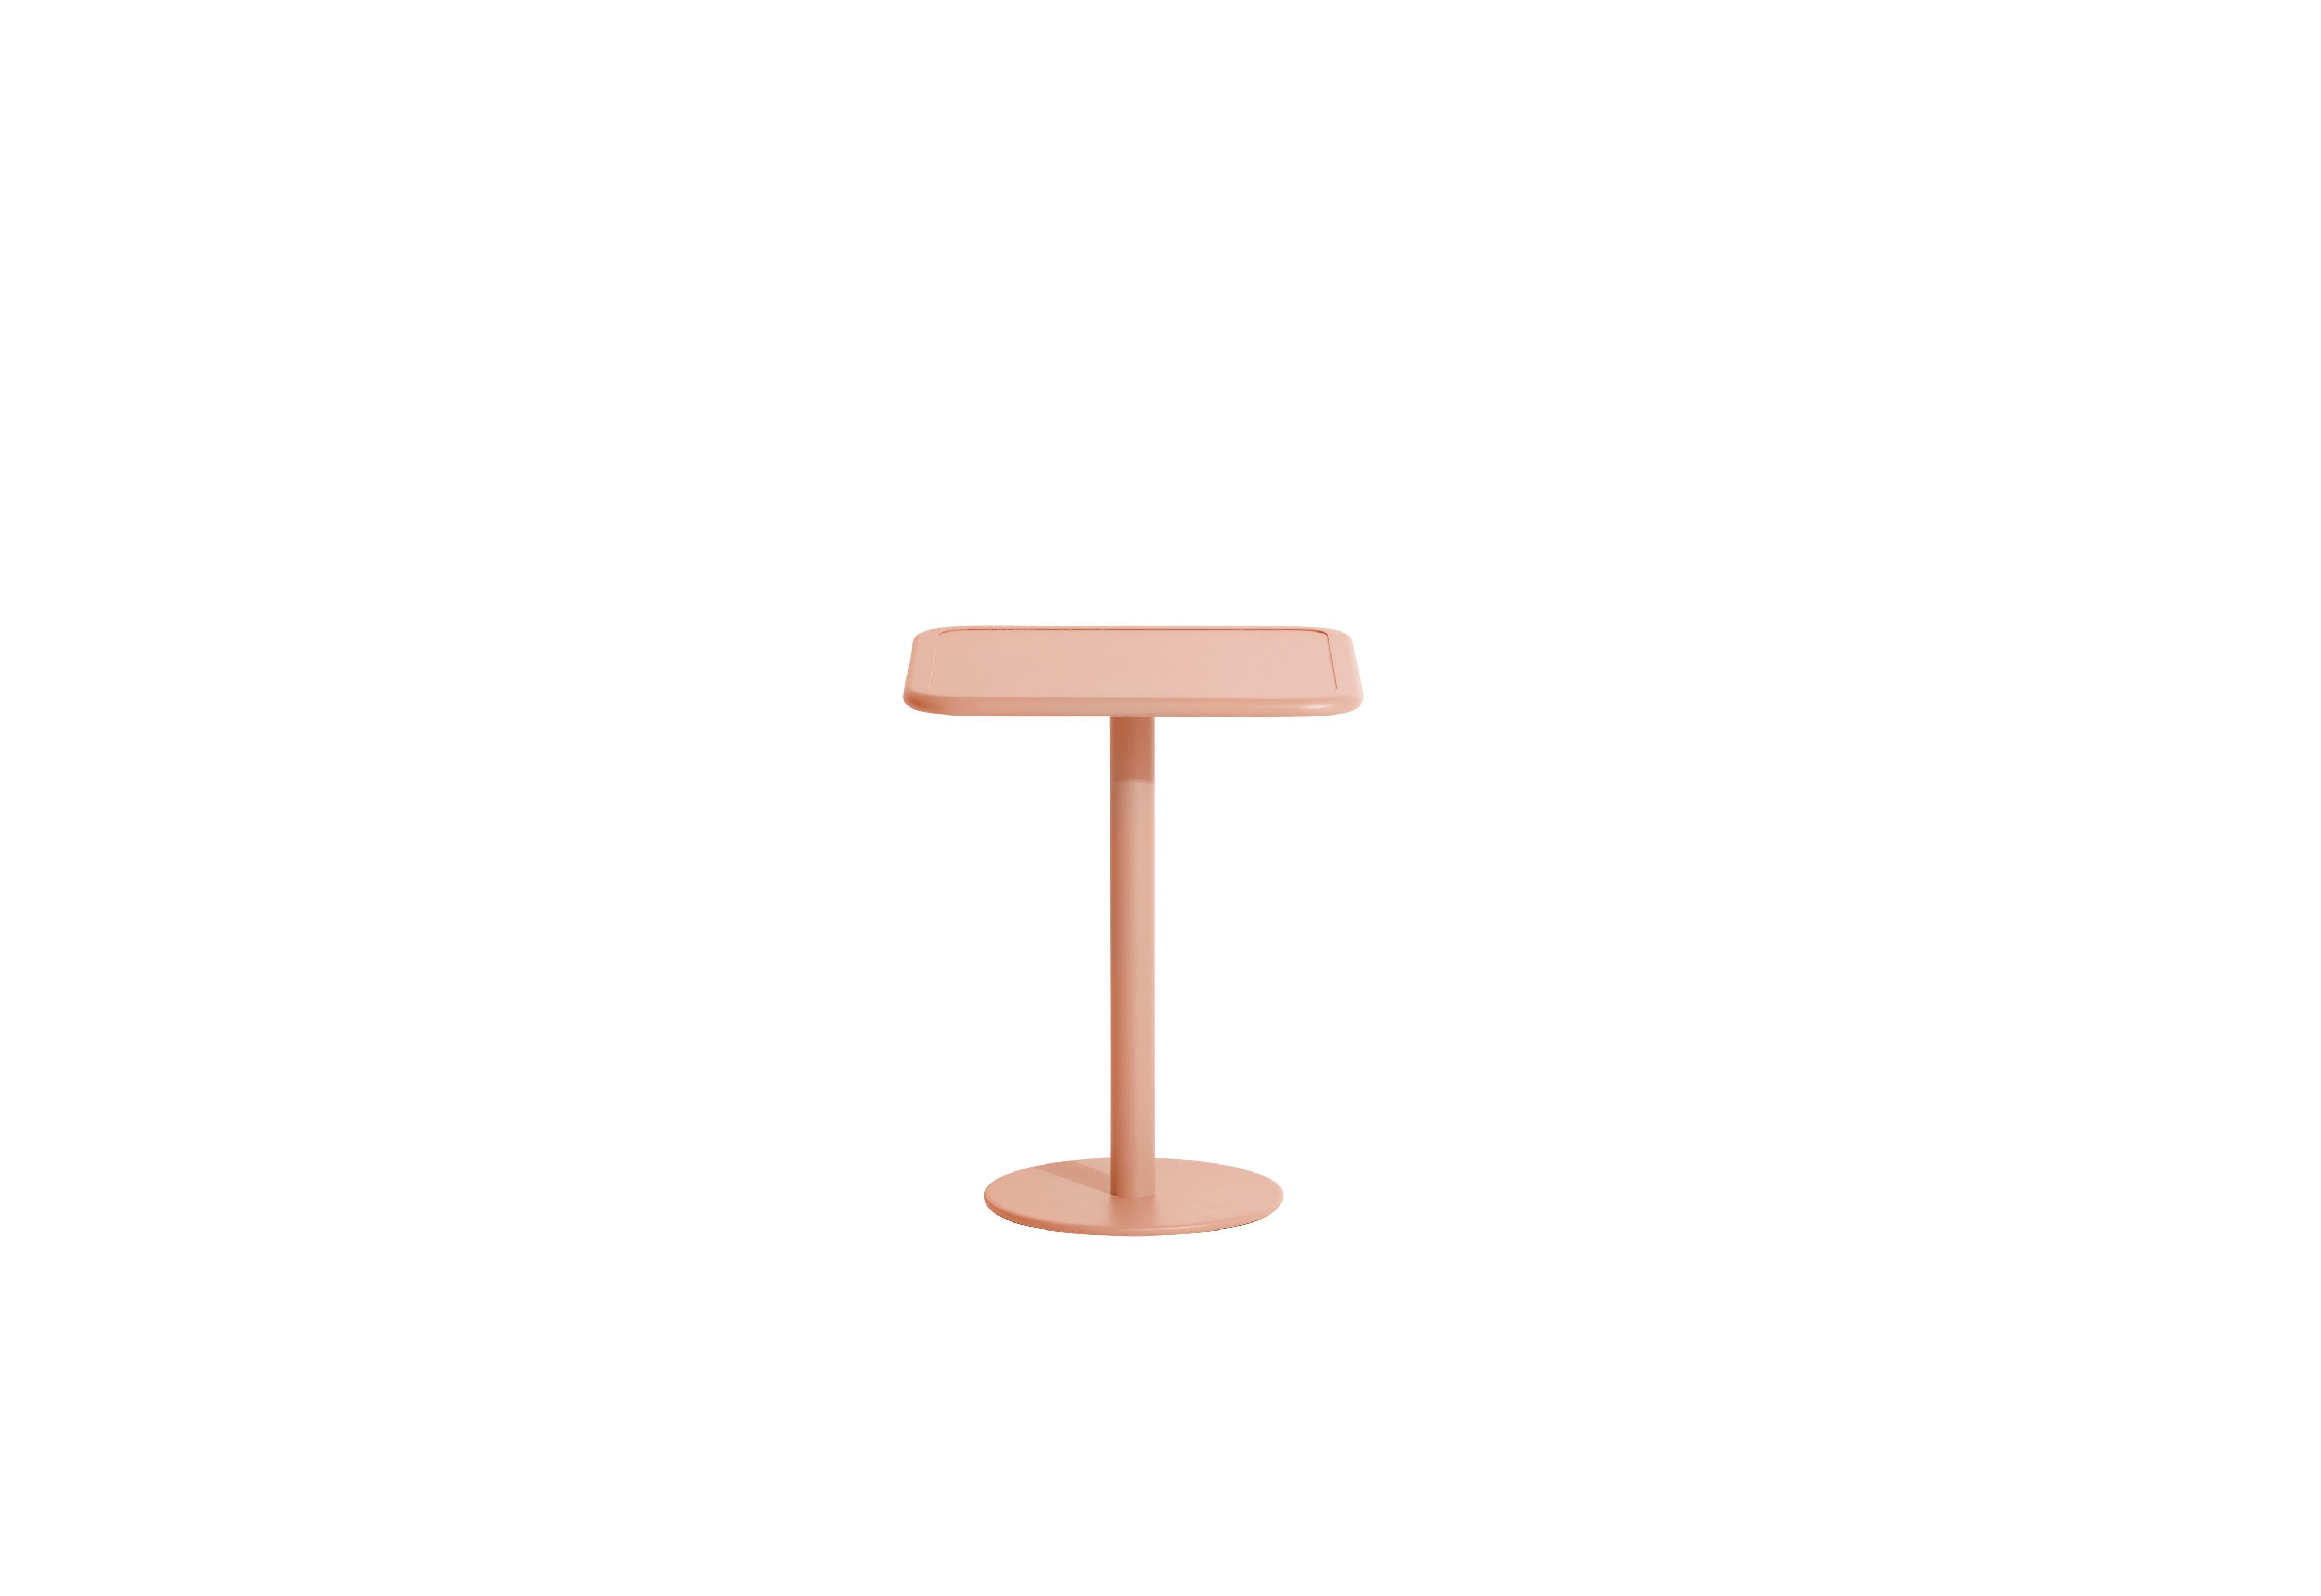 Petite Friture Week-End Bistro Square Dining Table in Blush Aluminium by Studio BrichetZiegler, 2017

The week-end collection is a full range of outdoor furniture, in aluminium grained epoxy paint, matt finish, that includes 18 functions and 8